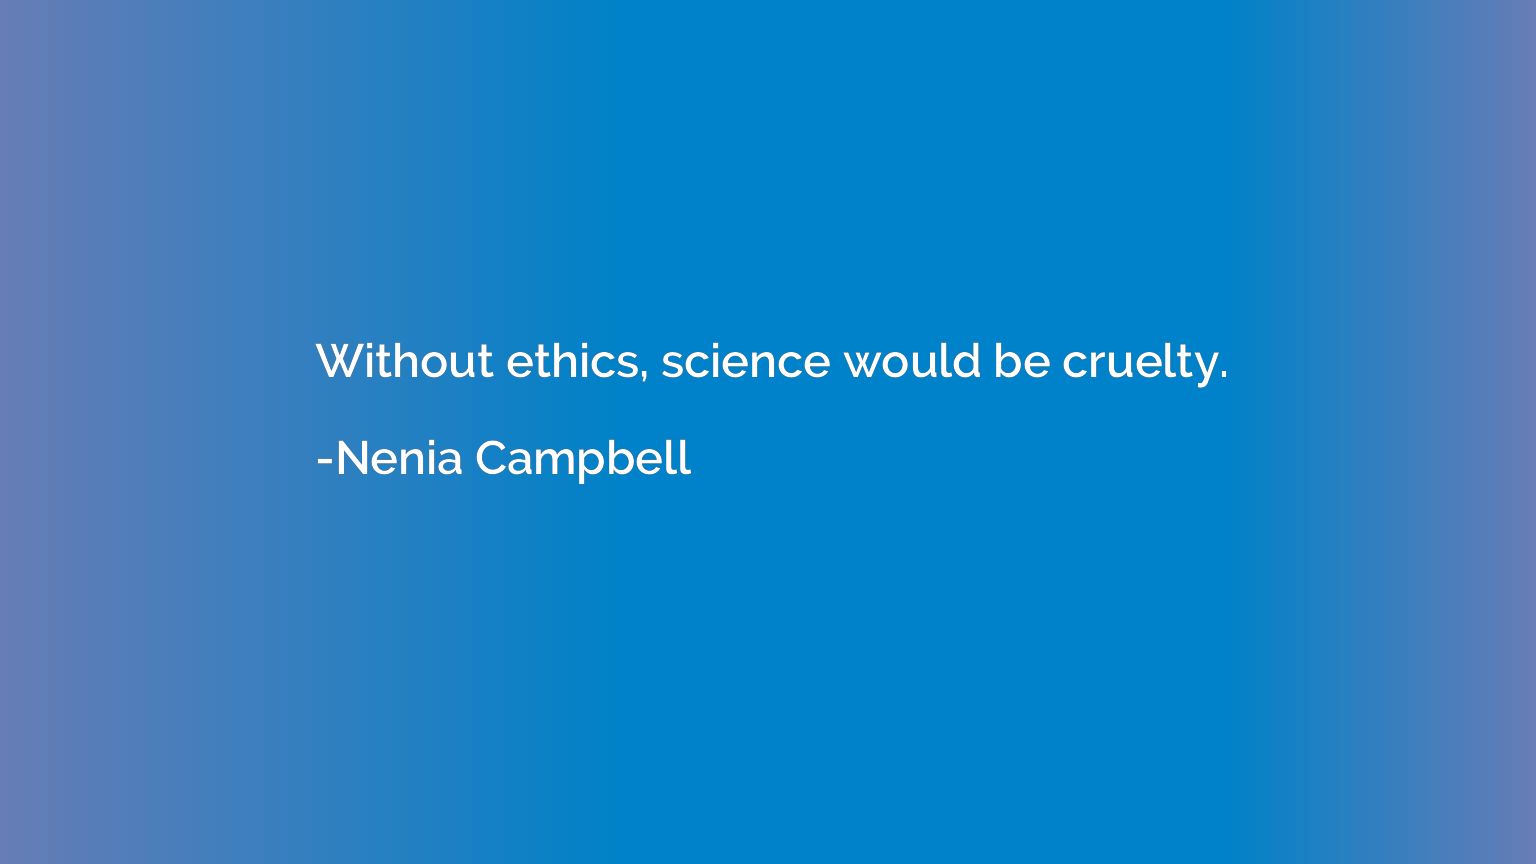 Without ethics, science would be cruelty.